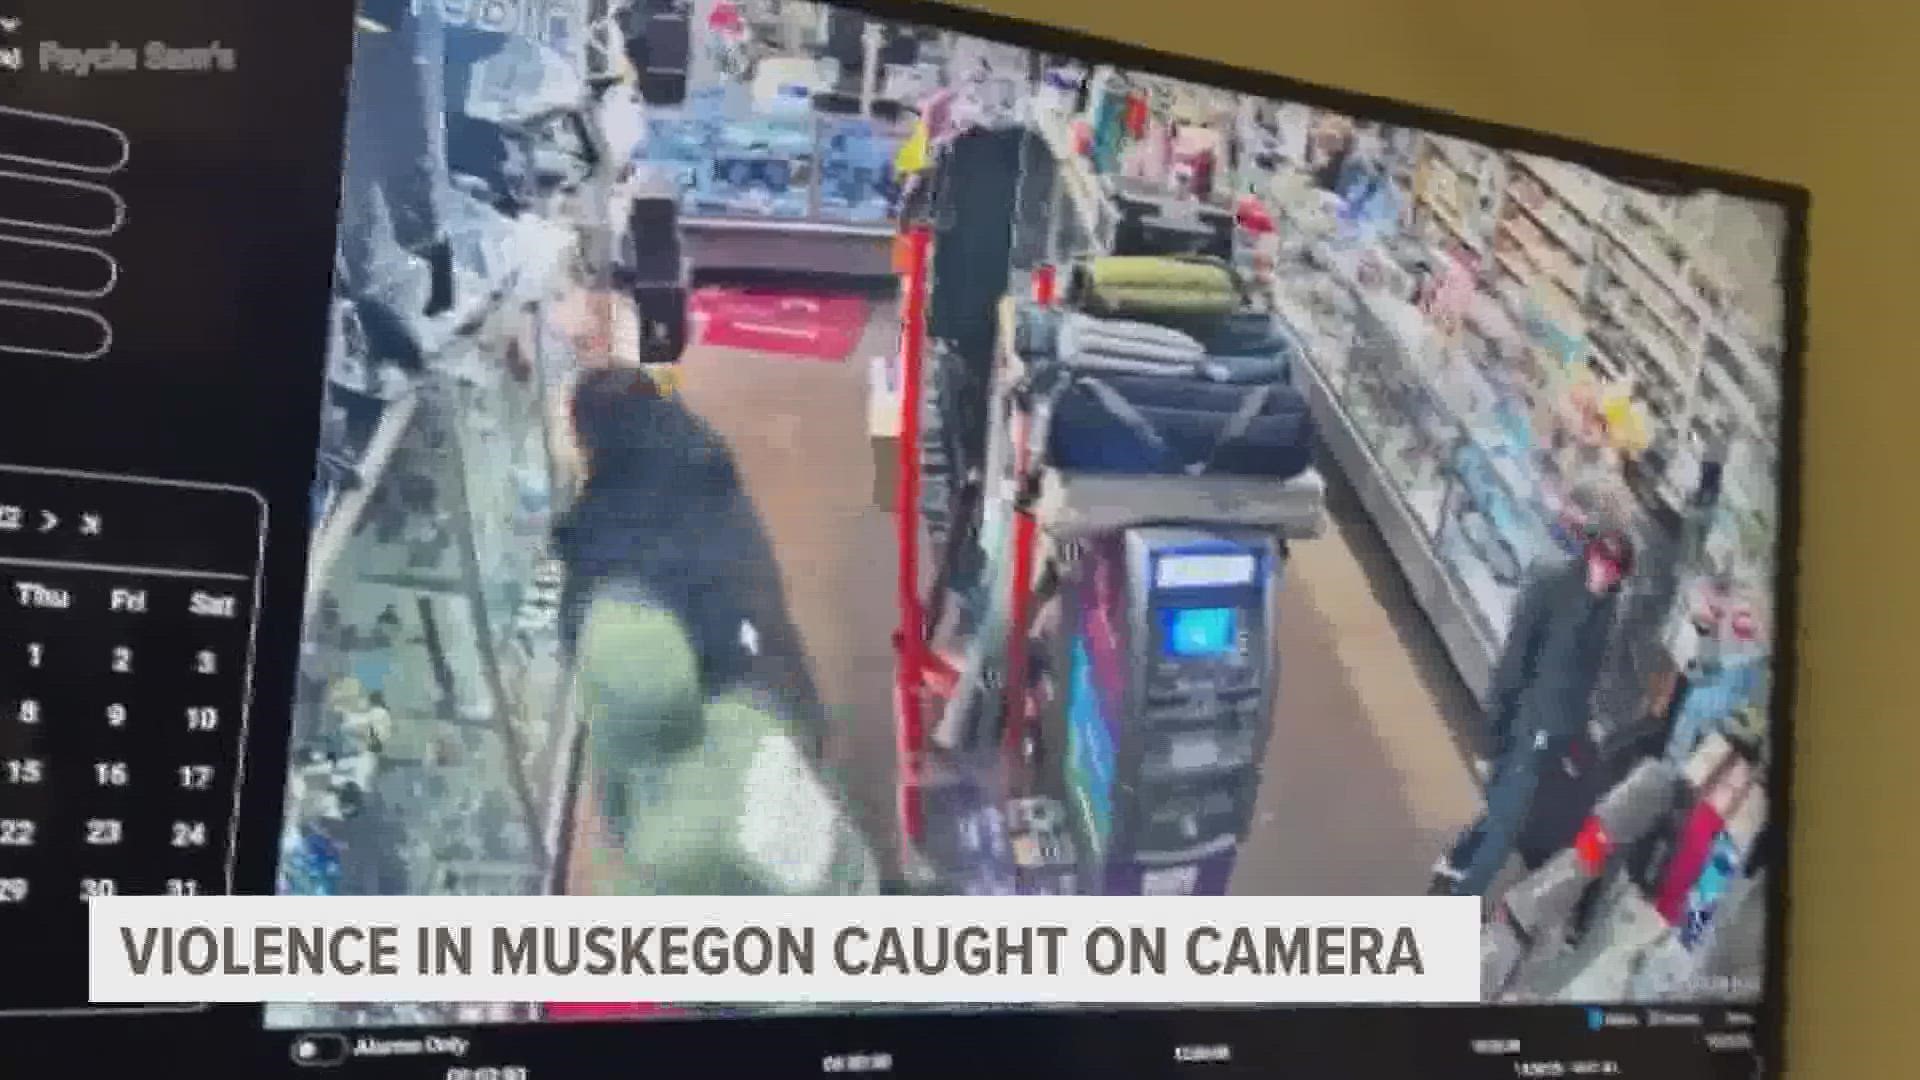 A bizarre attack, in which a customer lashed out at a store clerk seemingly at random, had police investigating in Muskegon Thursday.